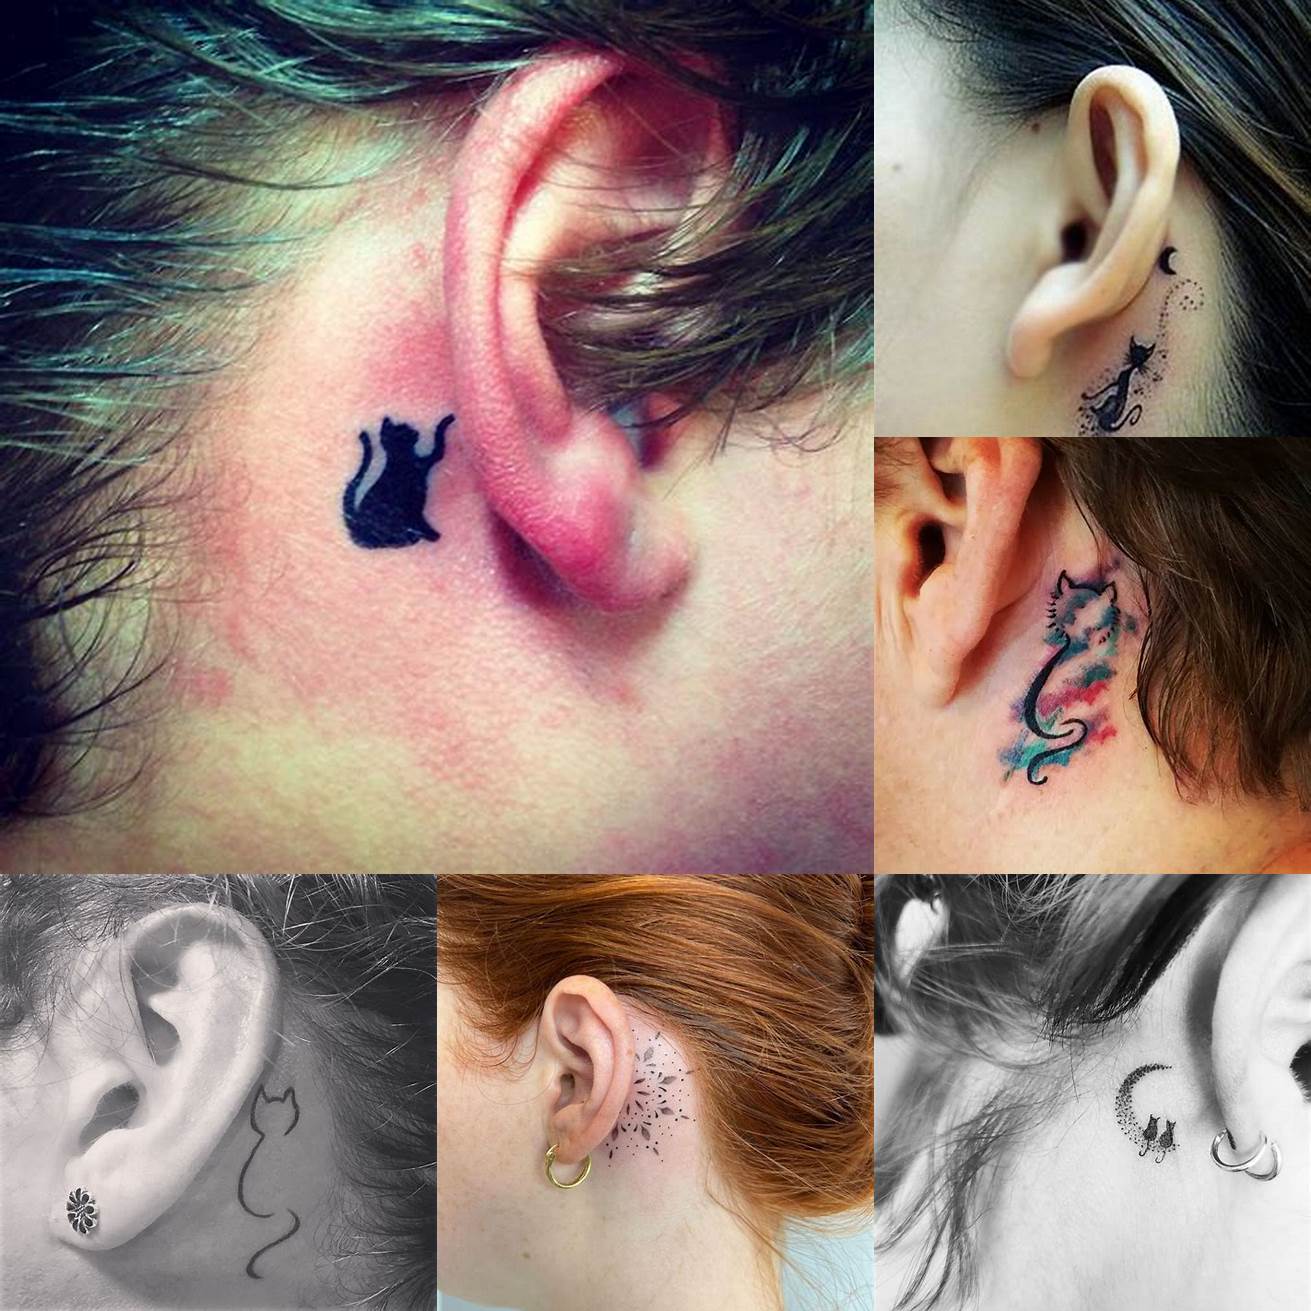 A cat behind the ear tattoo is a great way to express your personality